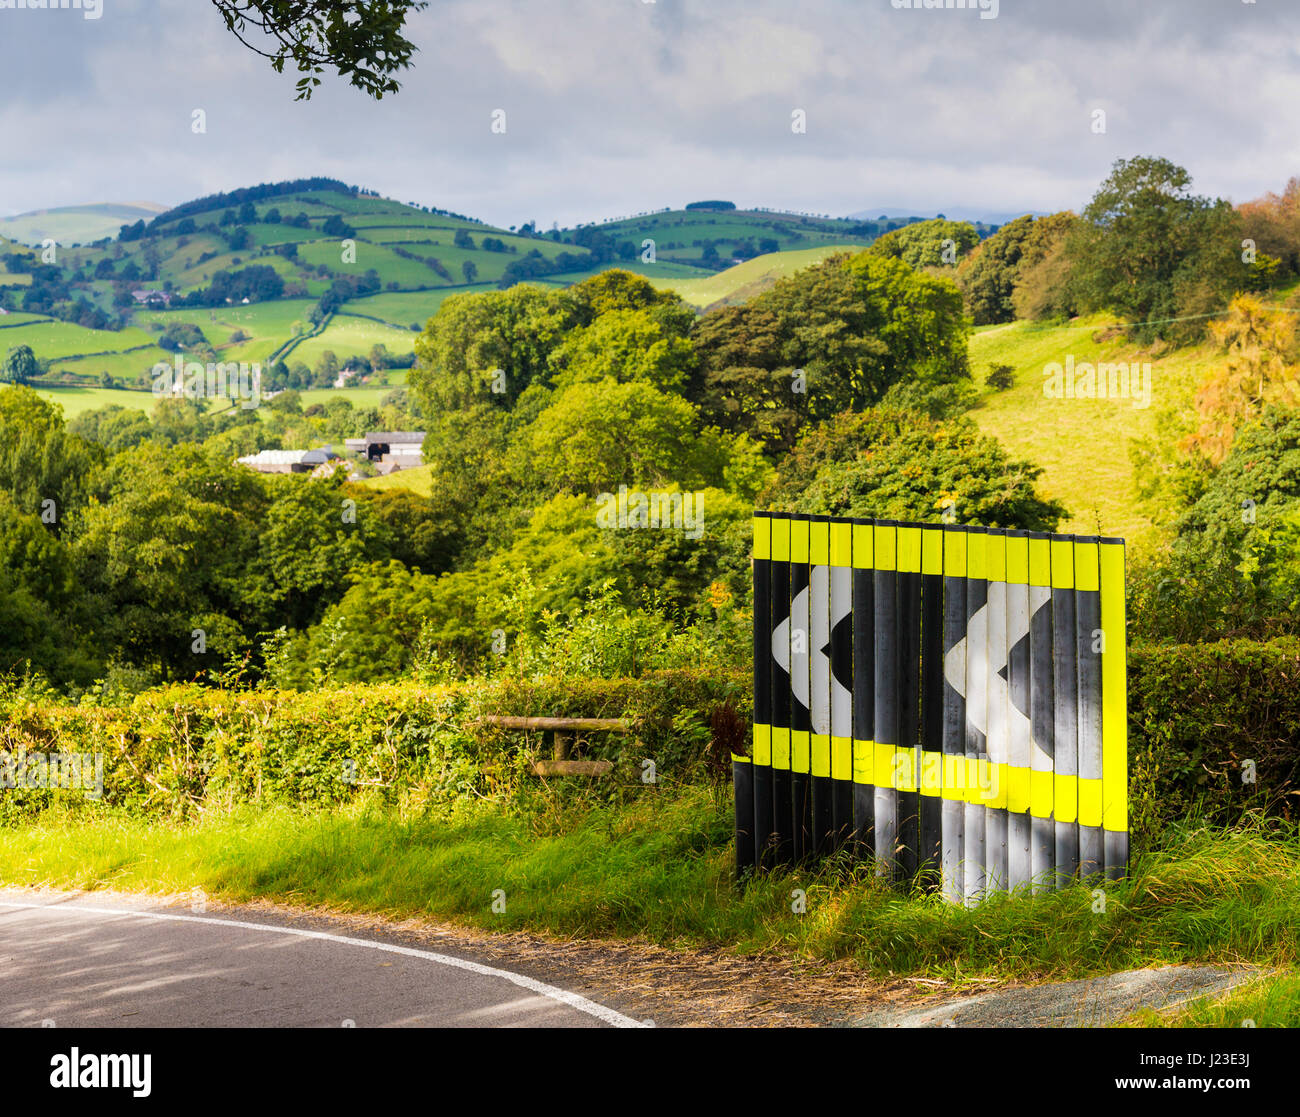 Dangerous bend warning sign in road with arrow signs in rolling countryside, UK Stock Photo